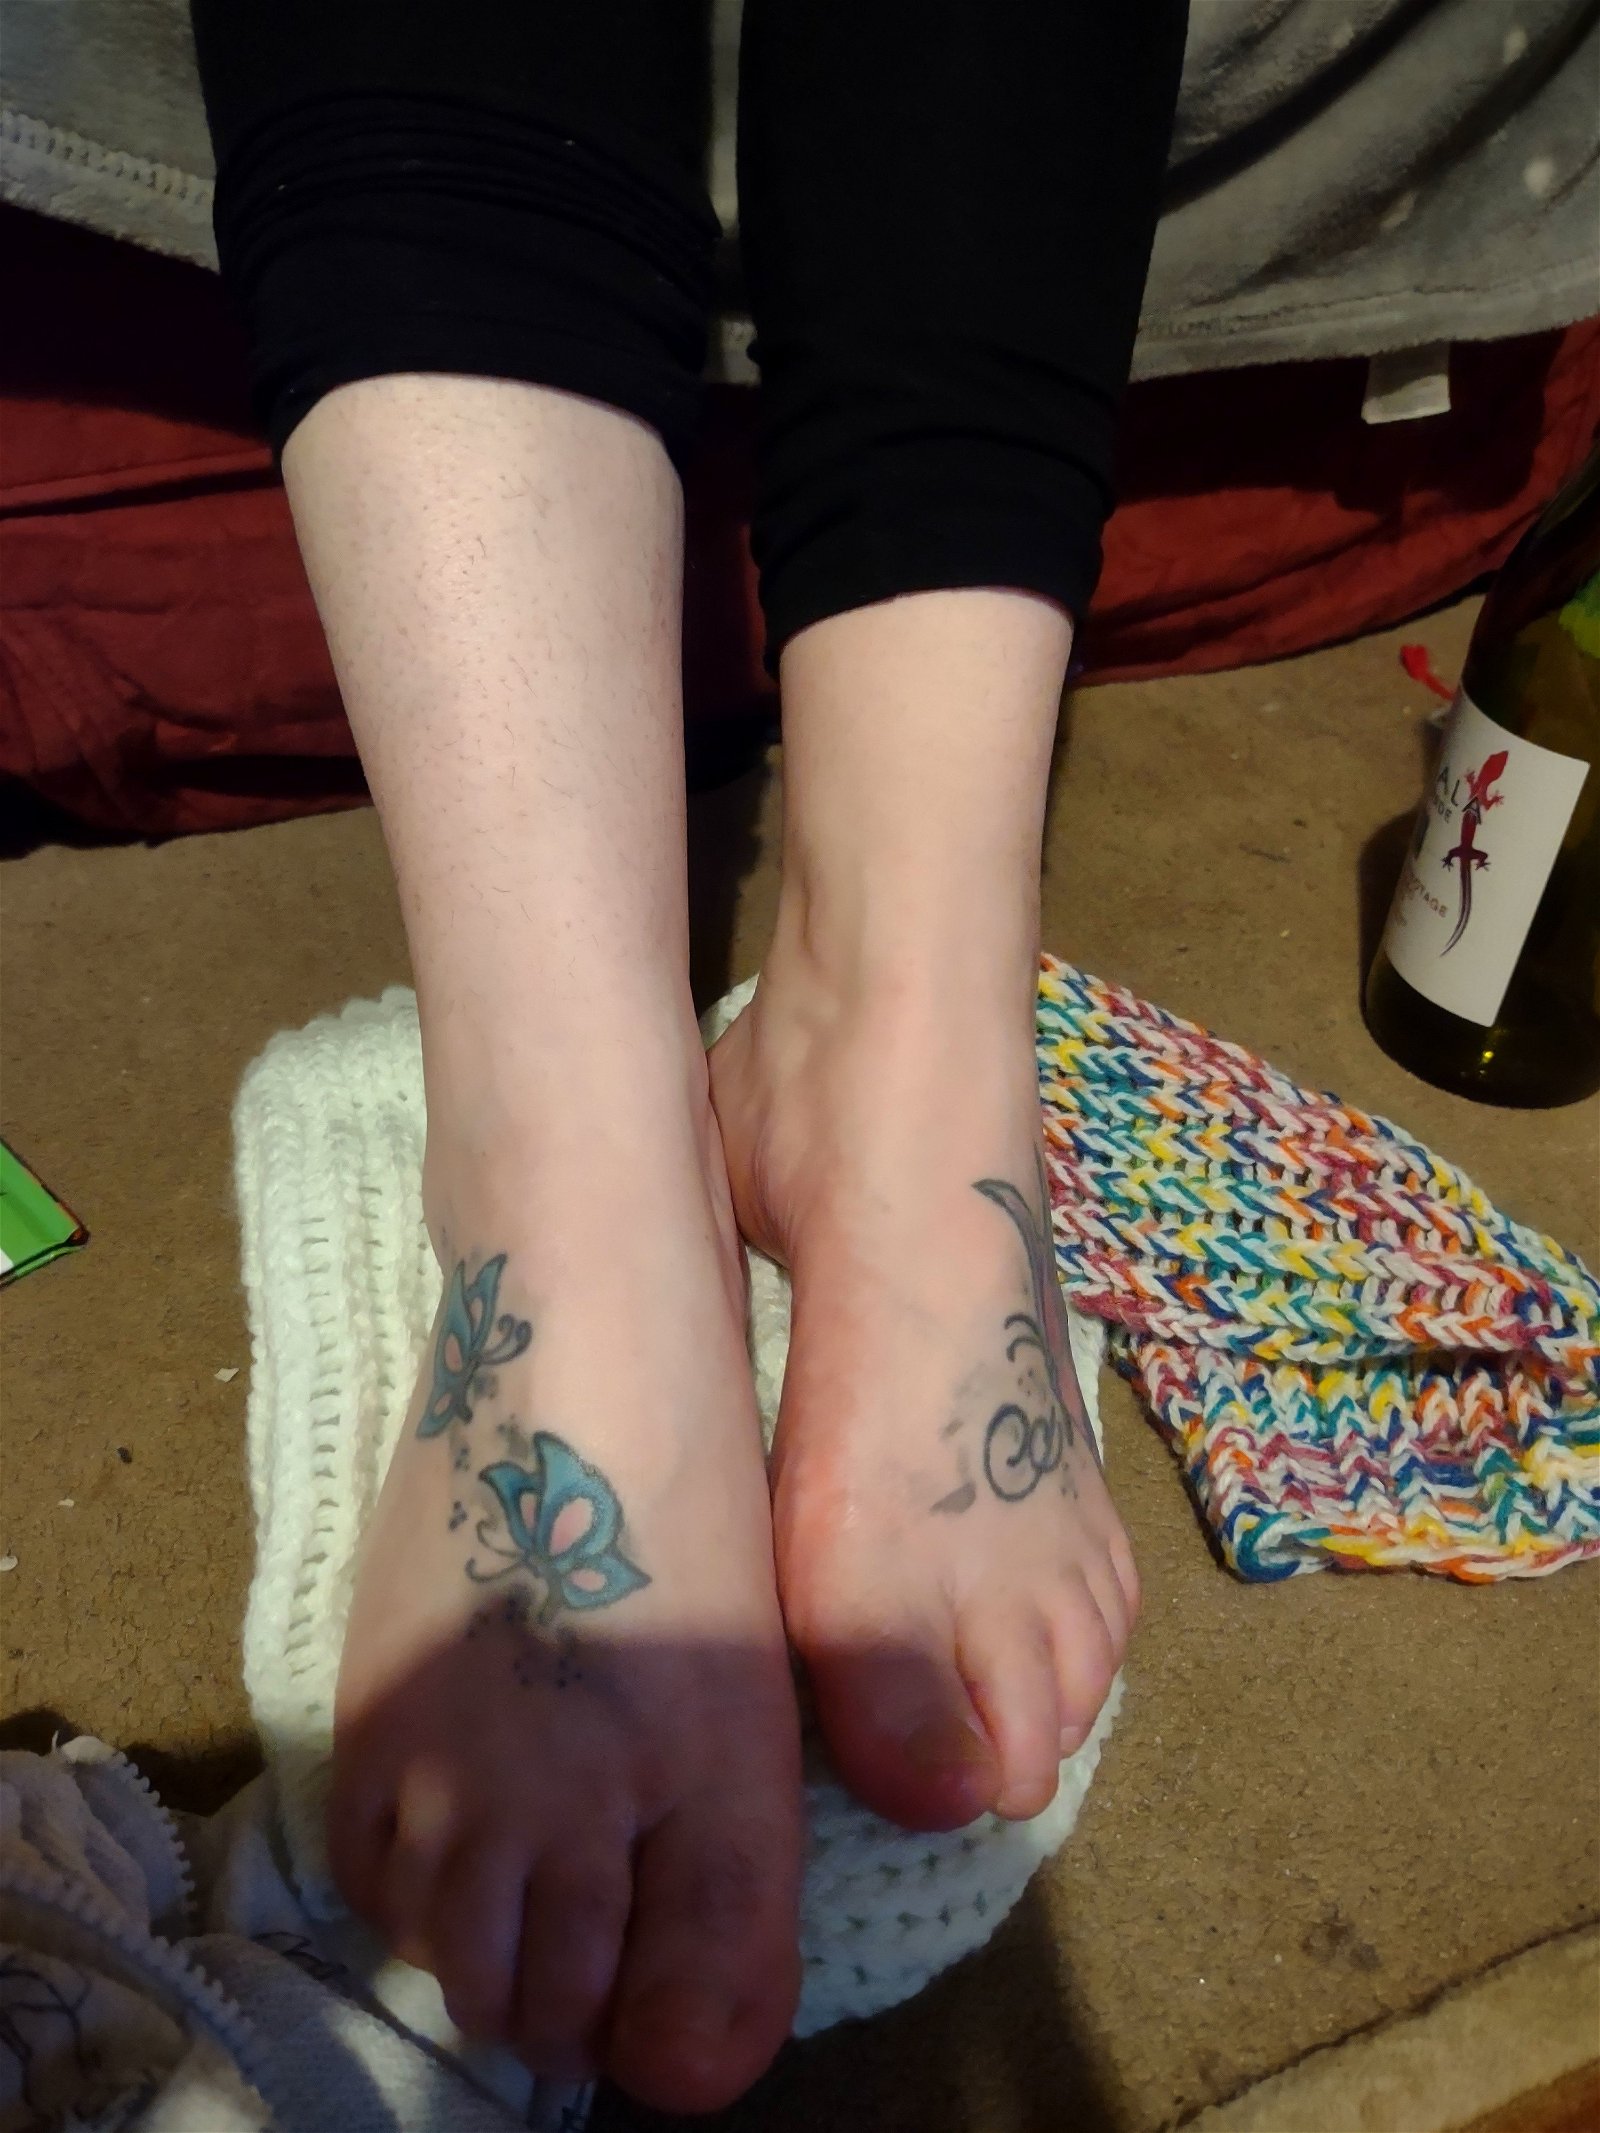 Photo by Bootleg86 with the username @Bootleg86,  February 23, 2022 at 1:16 PM. The post is about the topic Sexy Feet and the text says 'my wife's feet, shes thinking about starting an only fans... what do you guys think?'